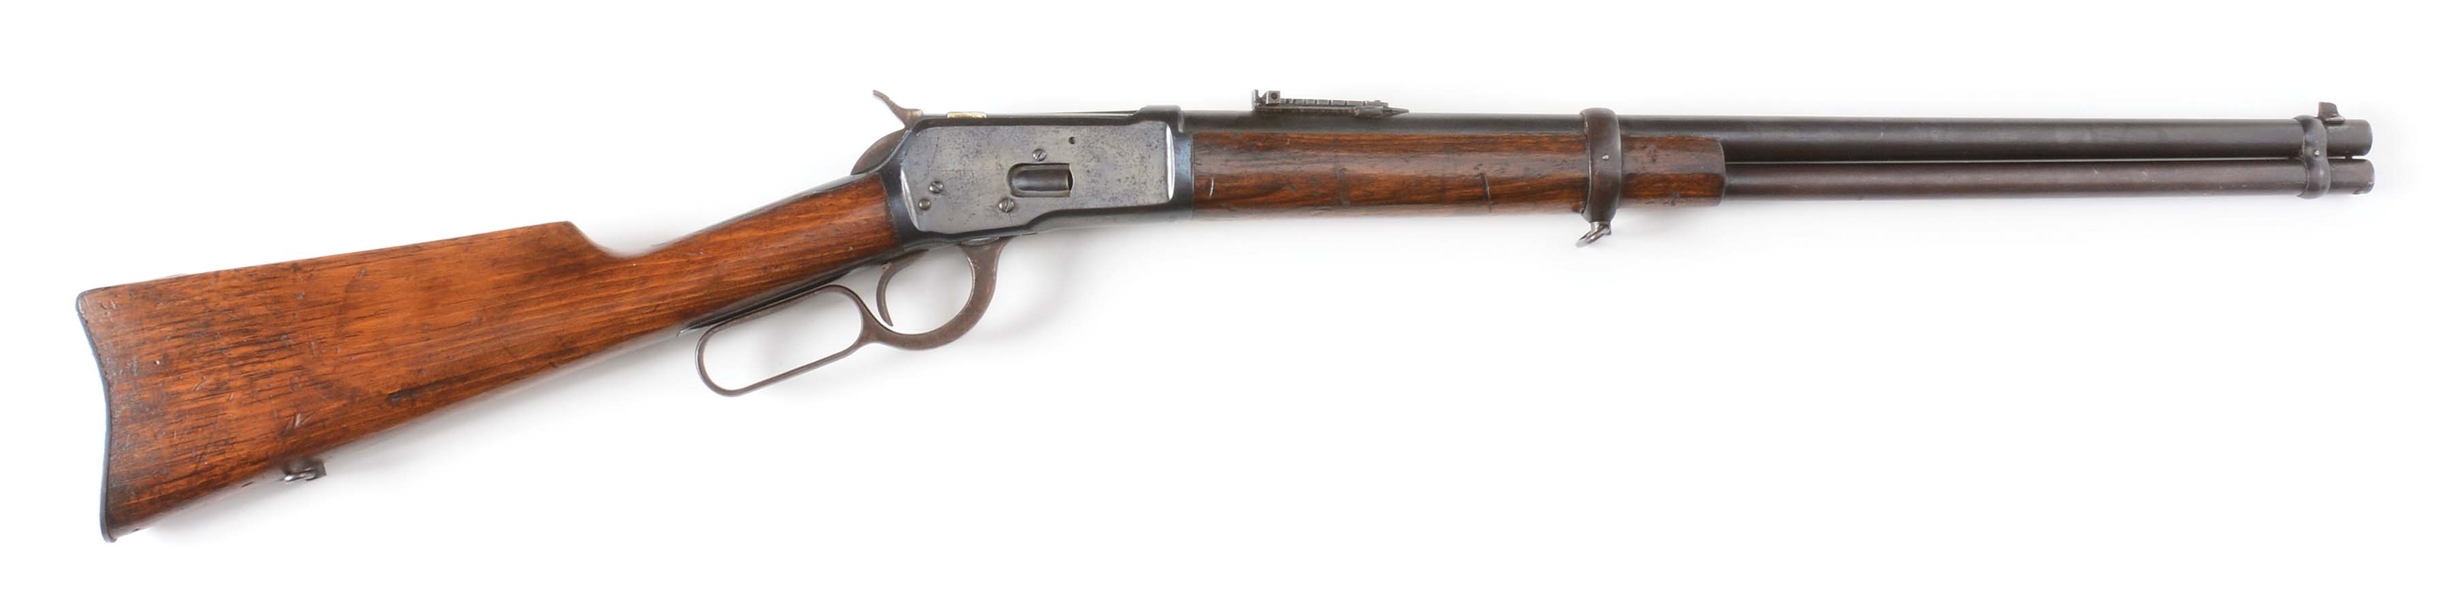 (C) EL TIGRE MODEL 1921 LEVER ACTION RIFLE, COMPLETE WITH CLEANING ROD IN BUTTSTOCK.